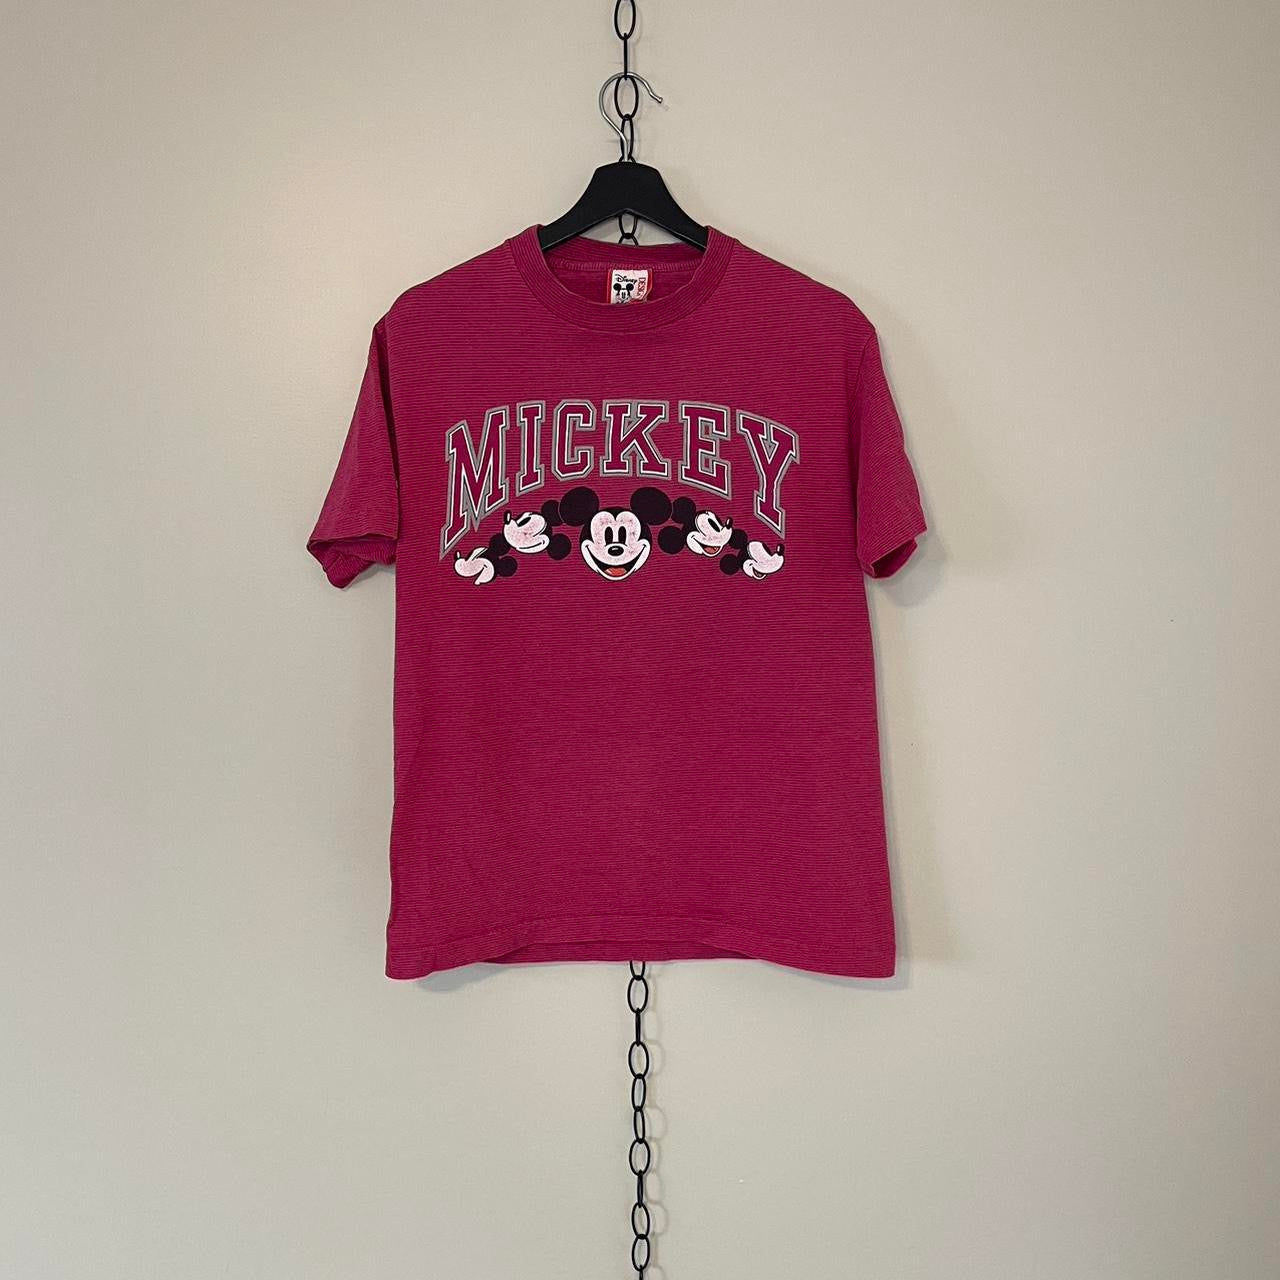 Vintage Disney Mickey Mouse Spellout T-shirt - S